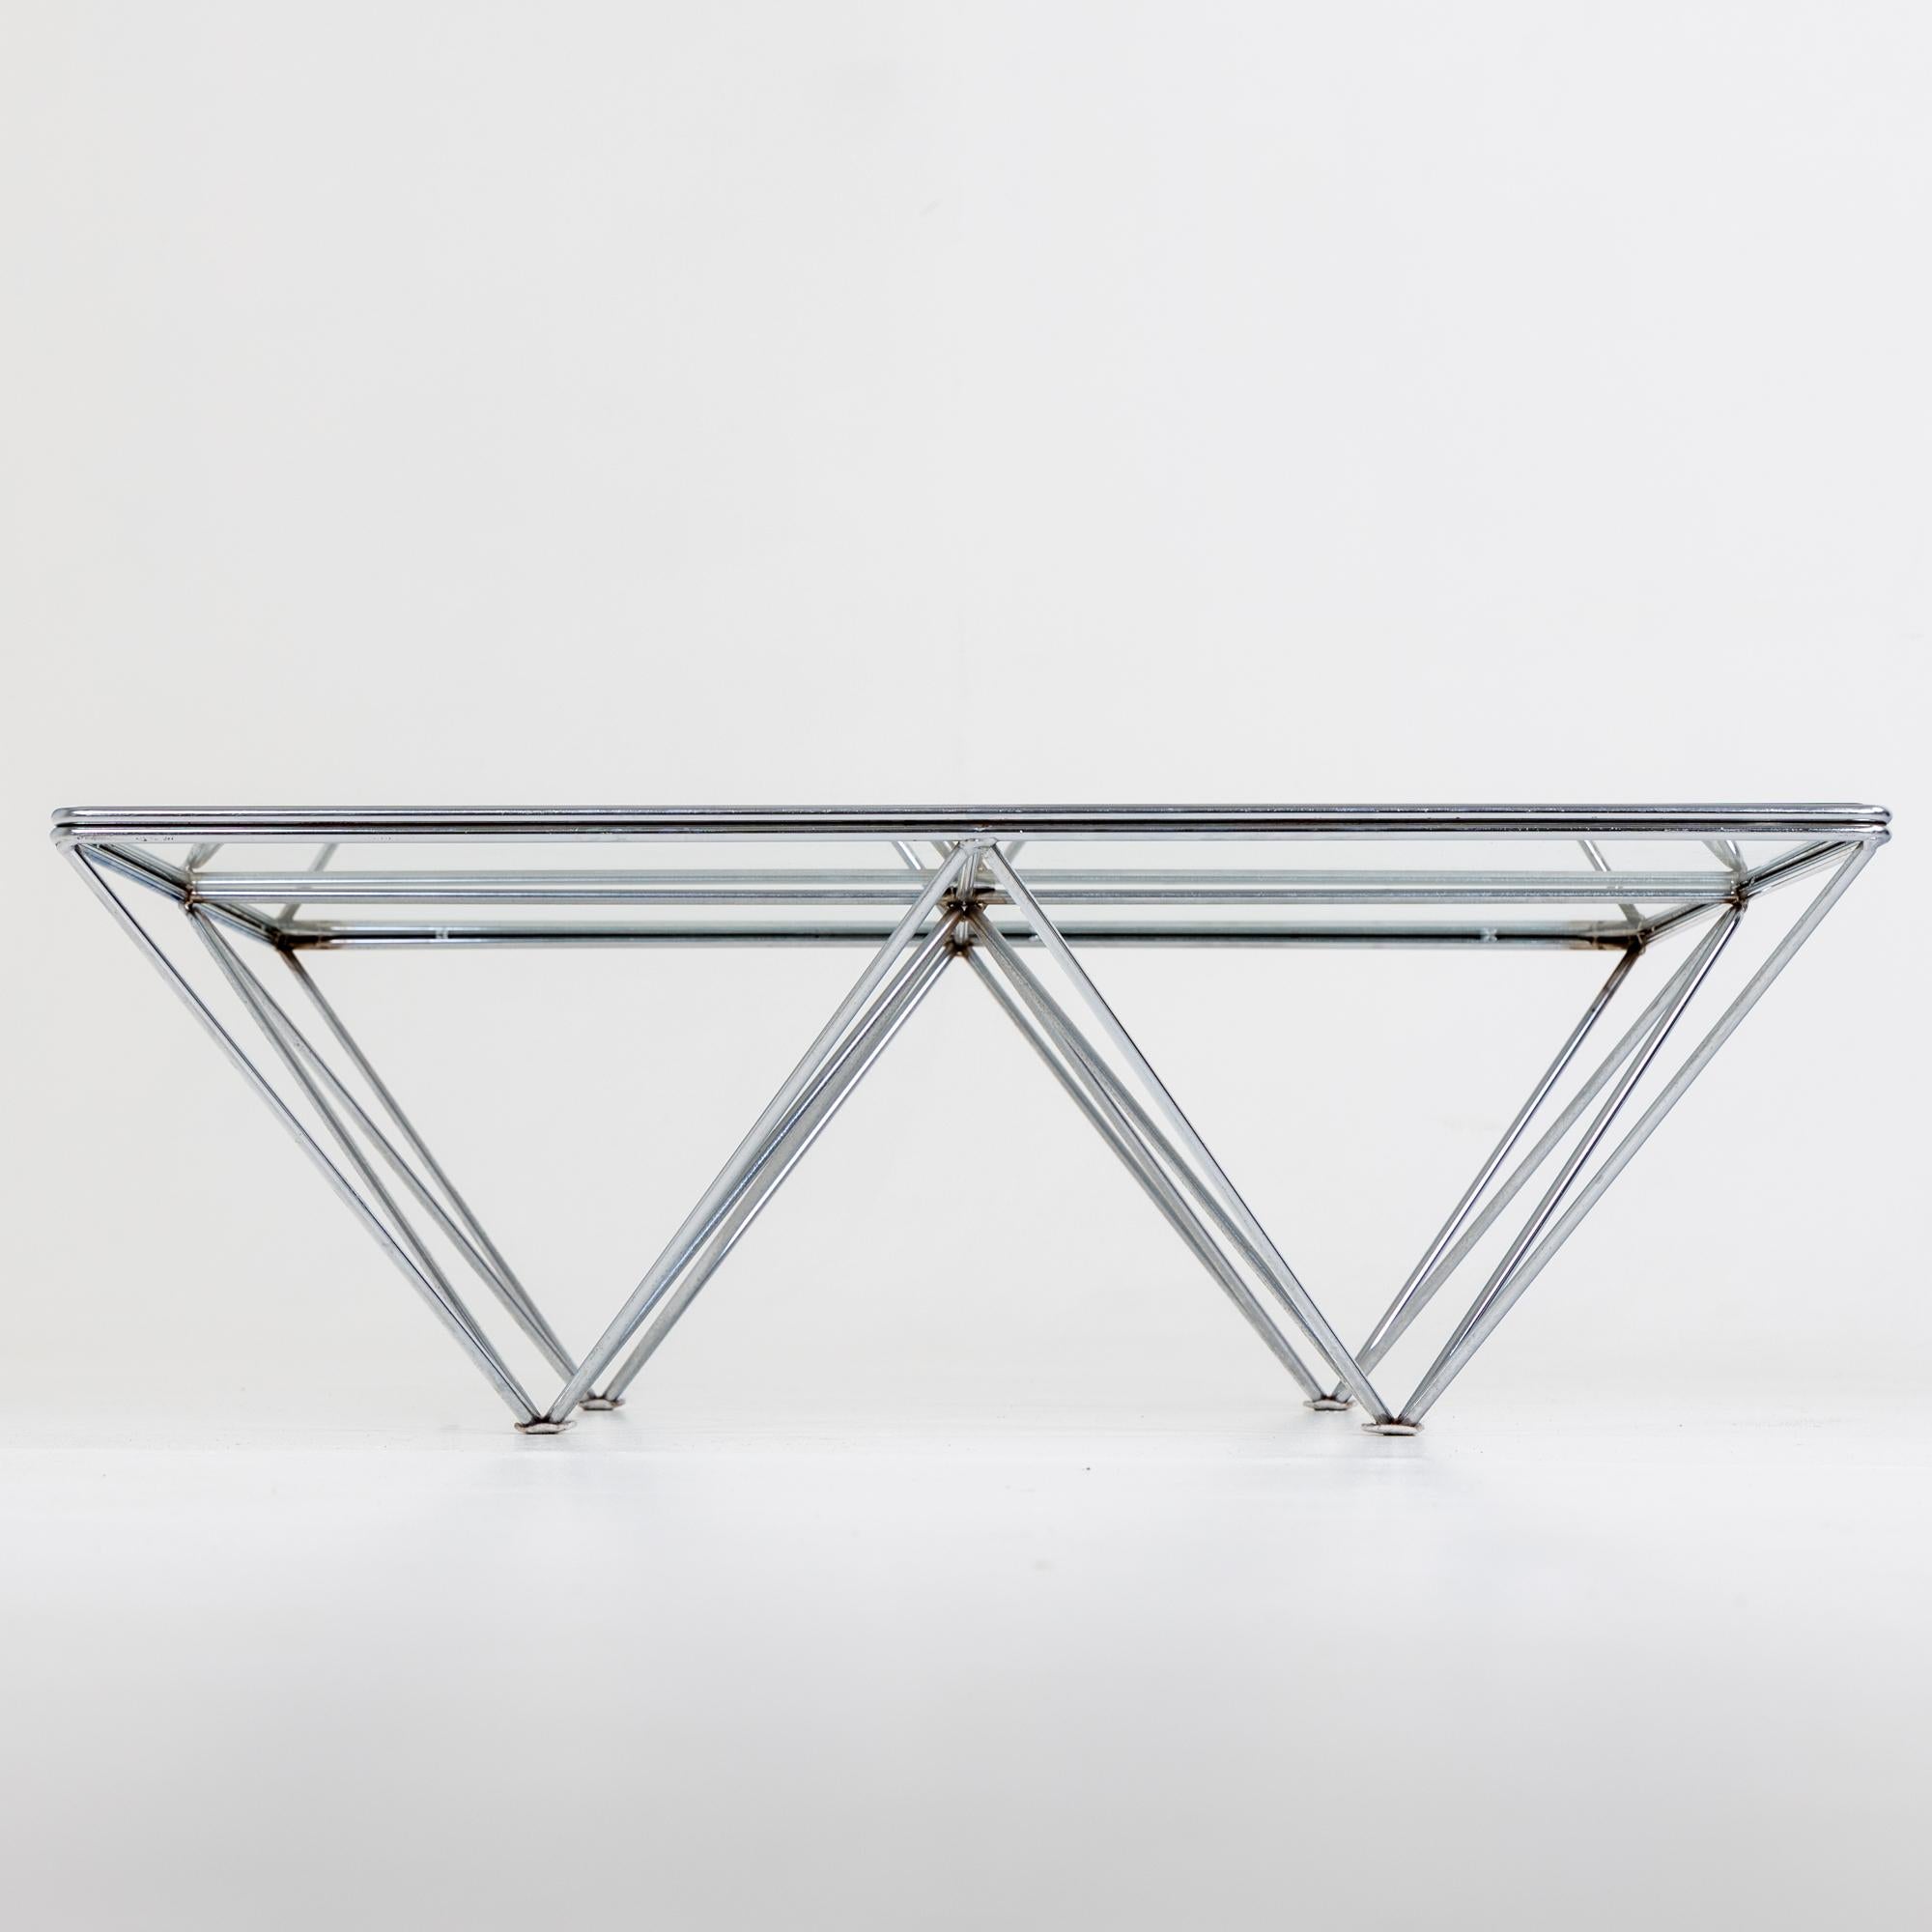 Modern Coffee Table Alanda, Chromed Metal, attributed to Paolo Piva for B&B Italy 1980s For Sale